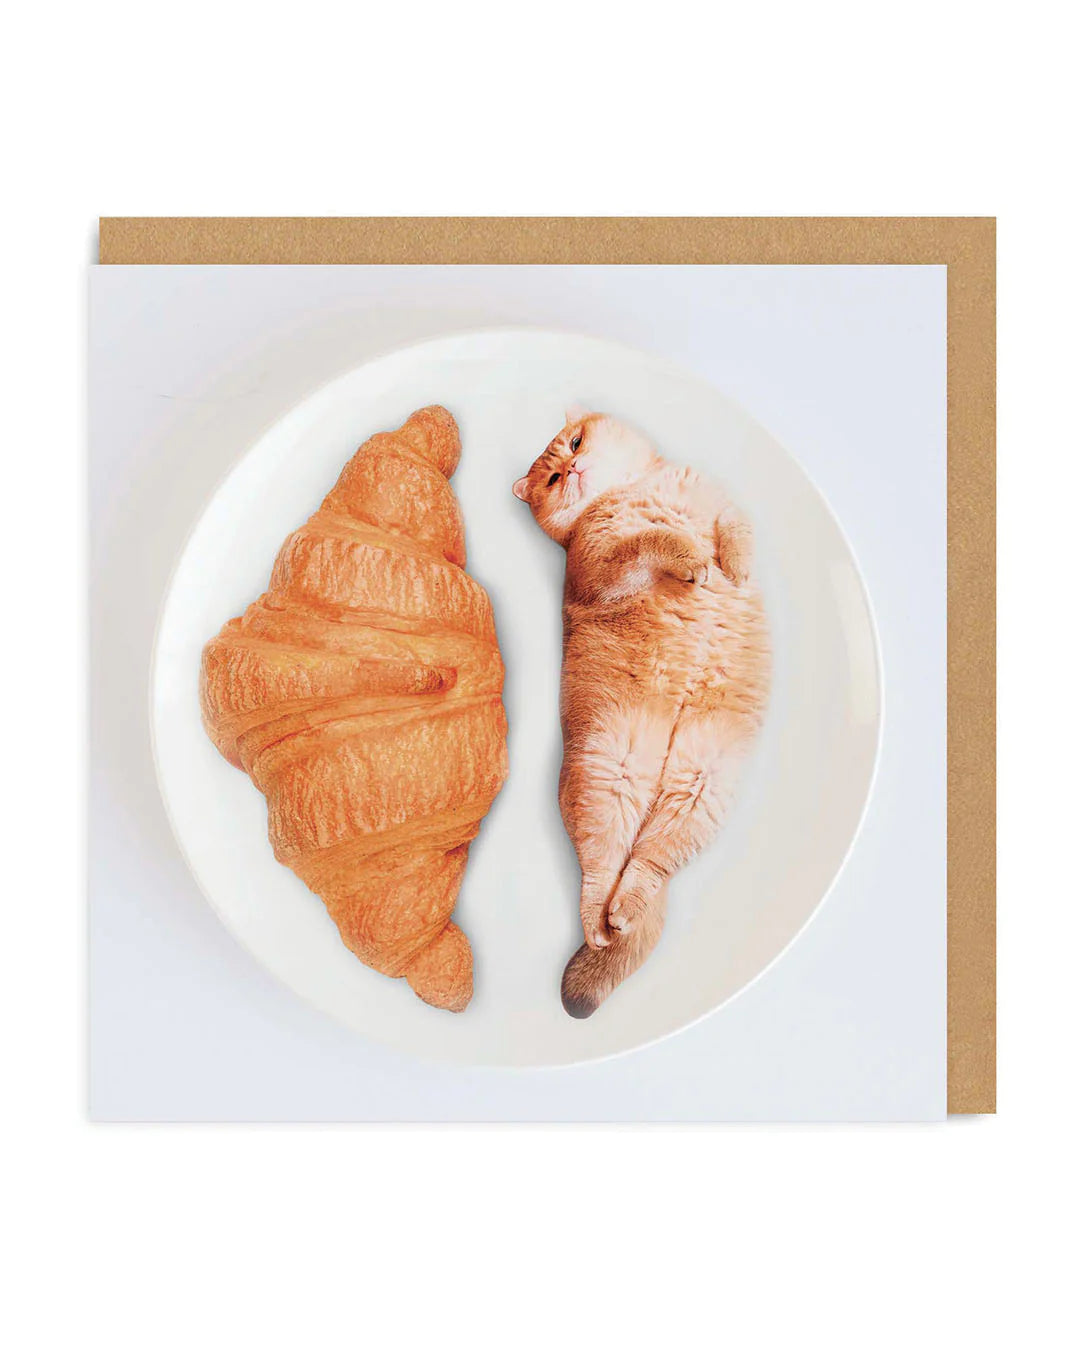 Cat Croissants Photographic Card by penny black